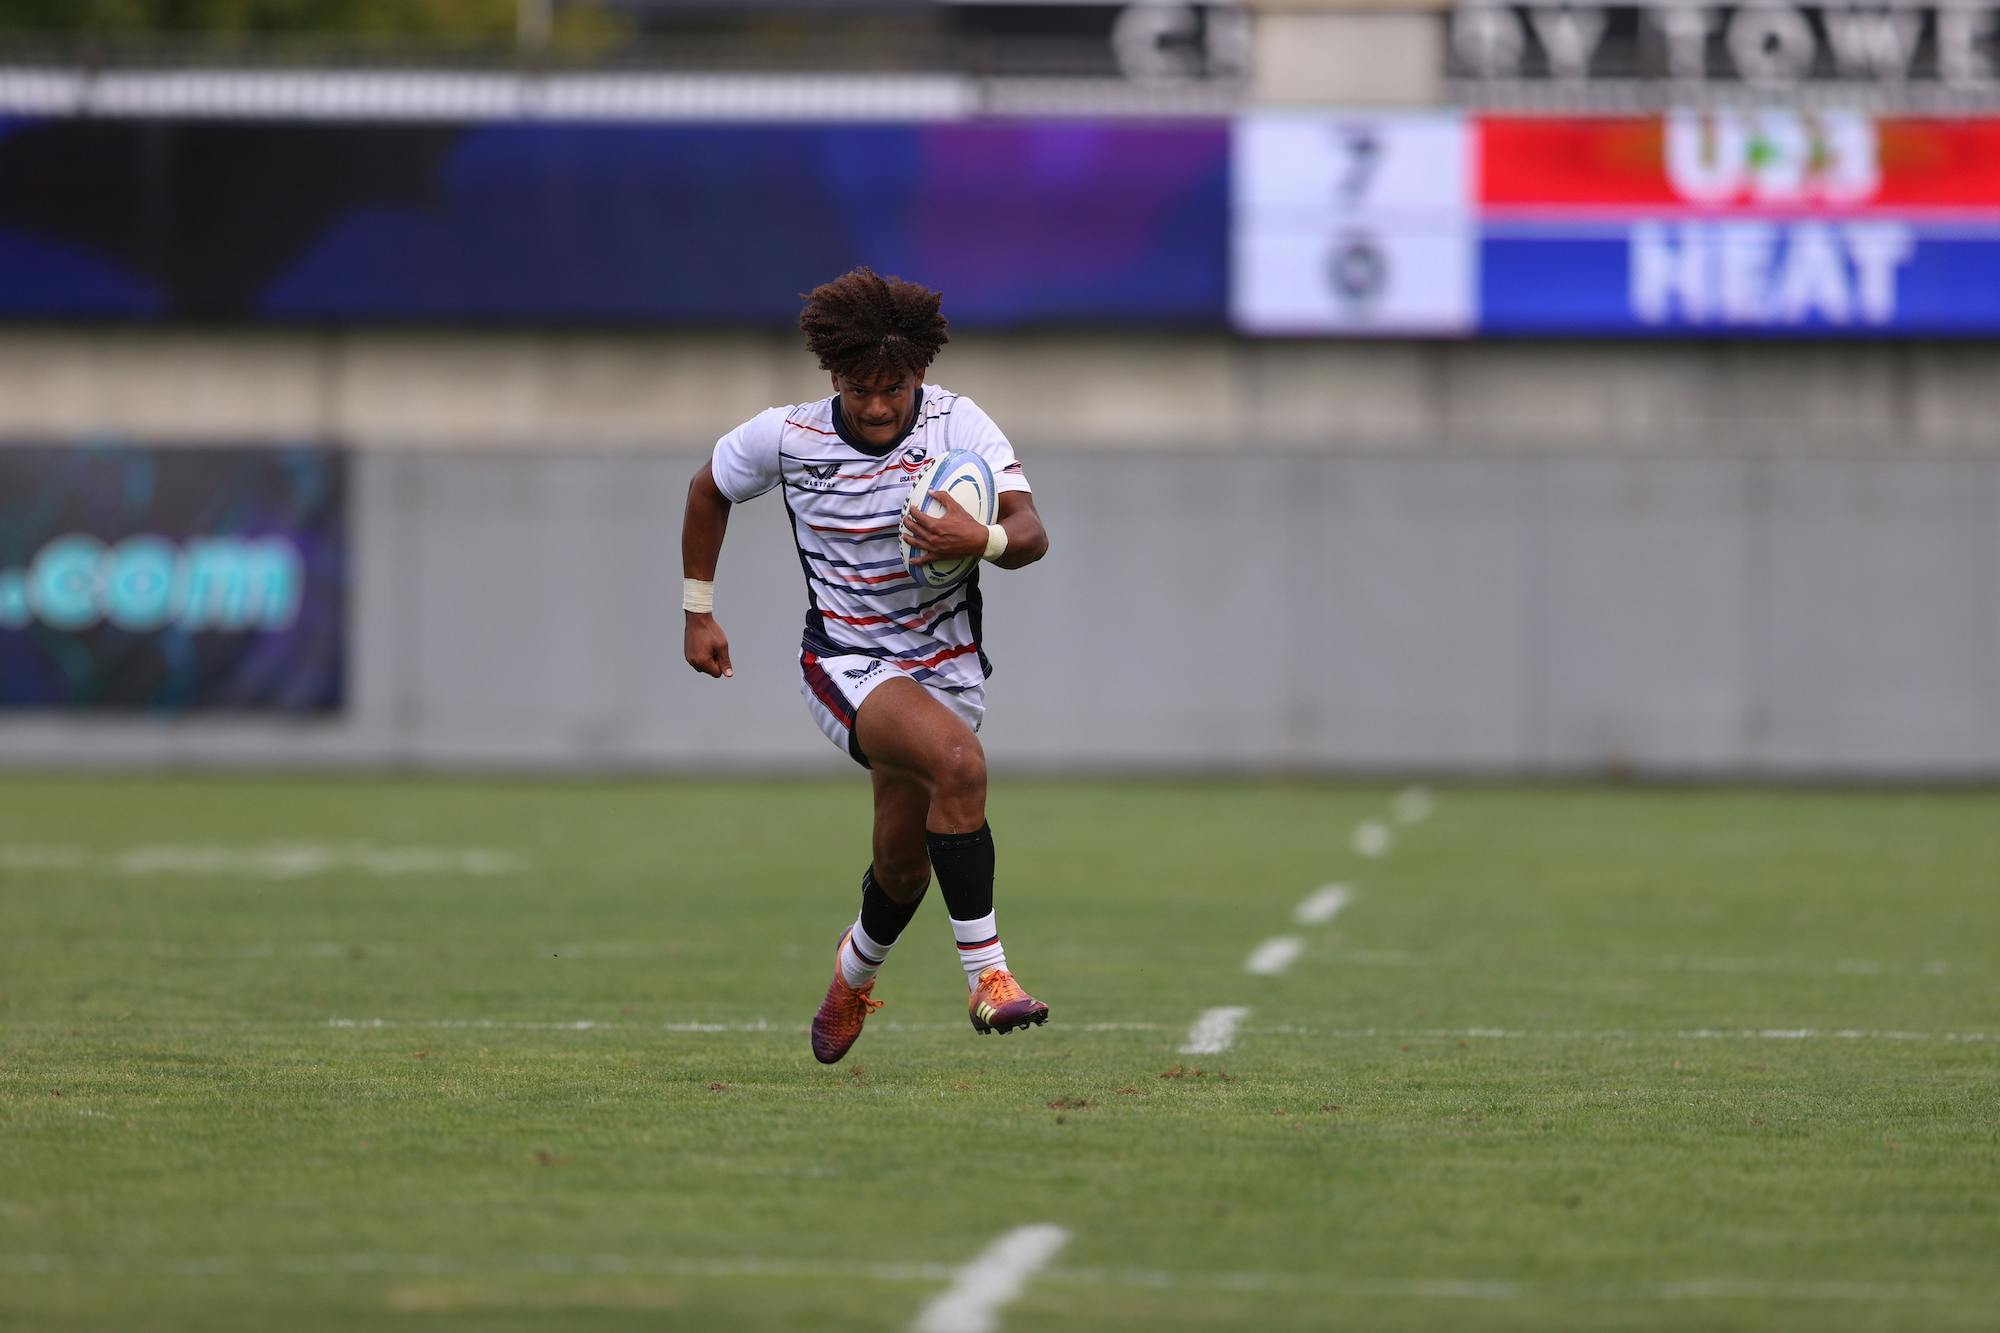 USA Rugby